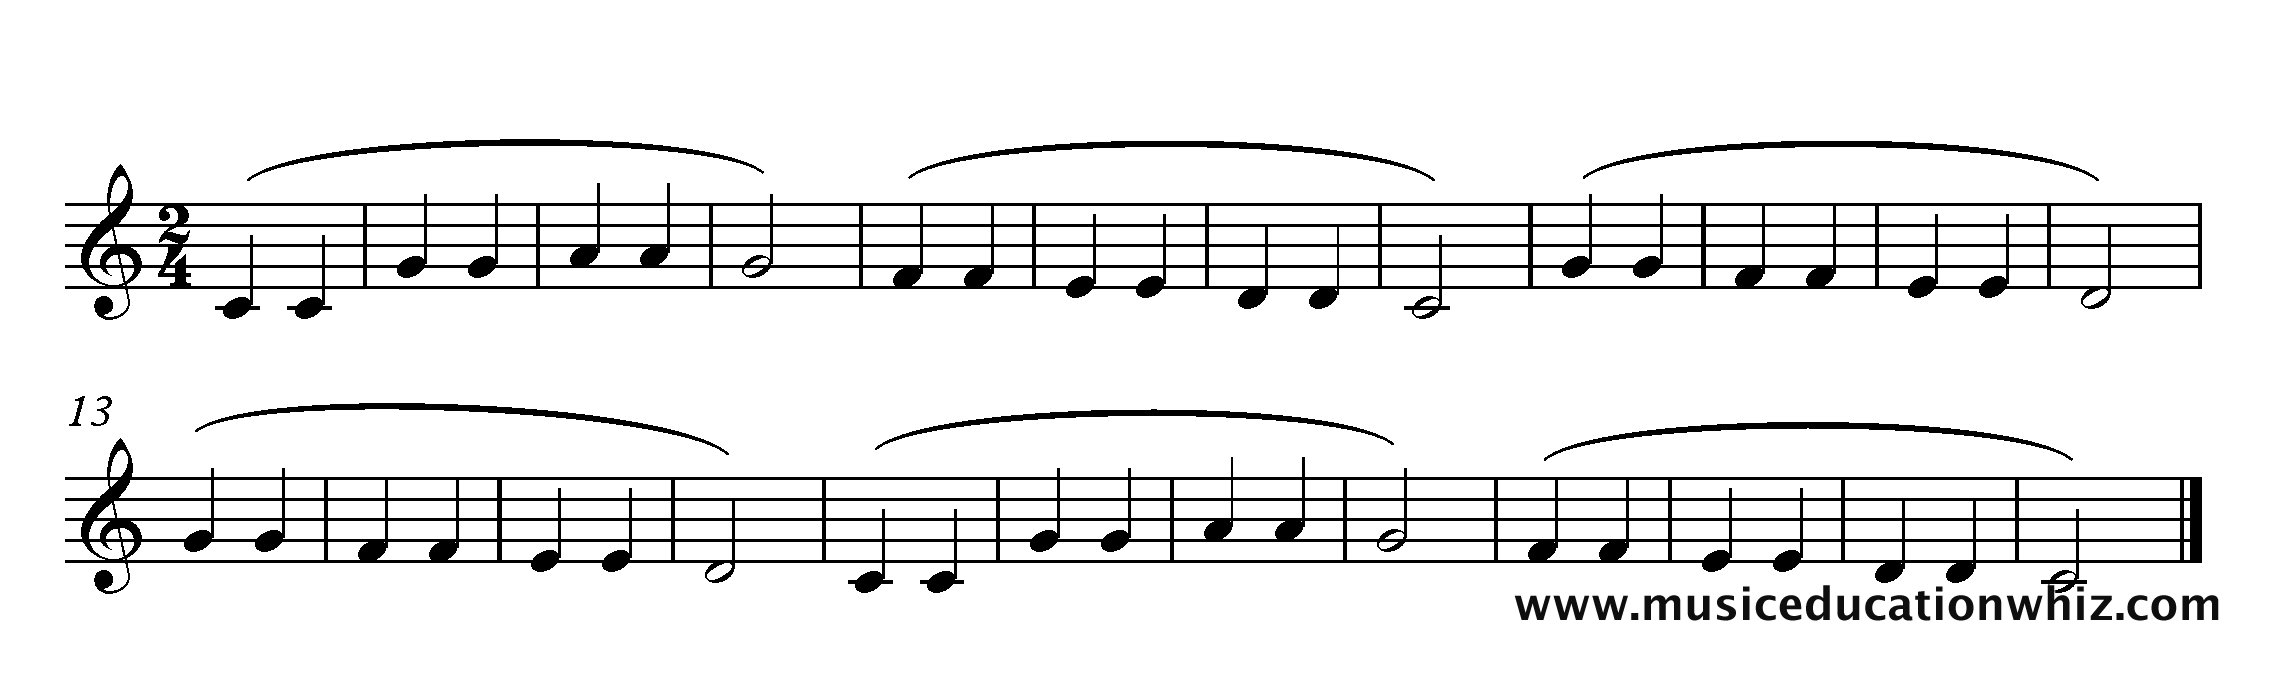 The music for 'Twinkle Twinkle Little Star' with phrase marks